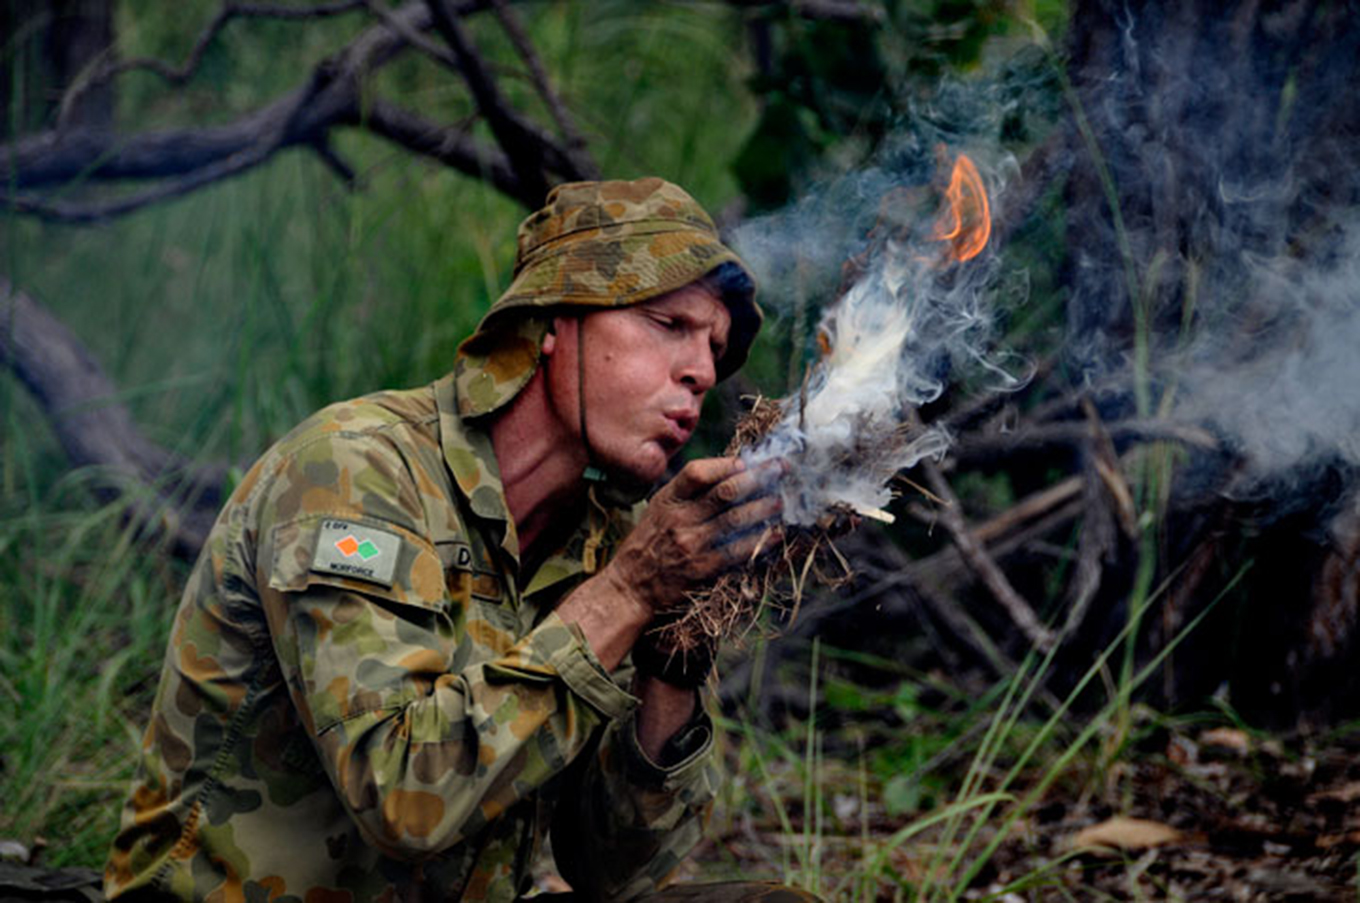 Man in Australian army uniform blowing tinder bundle into flame